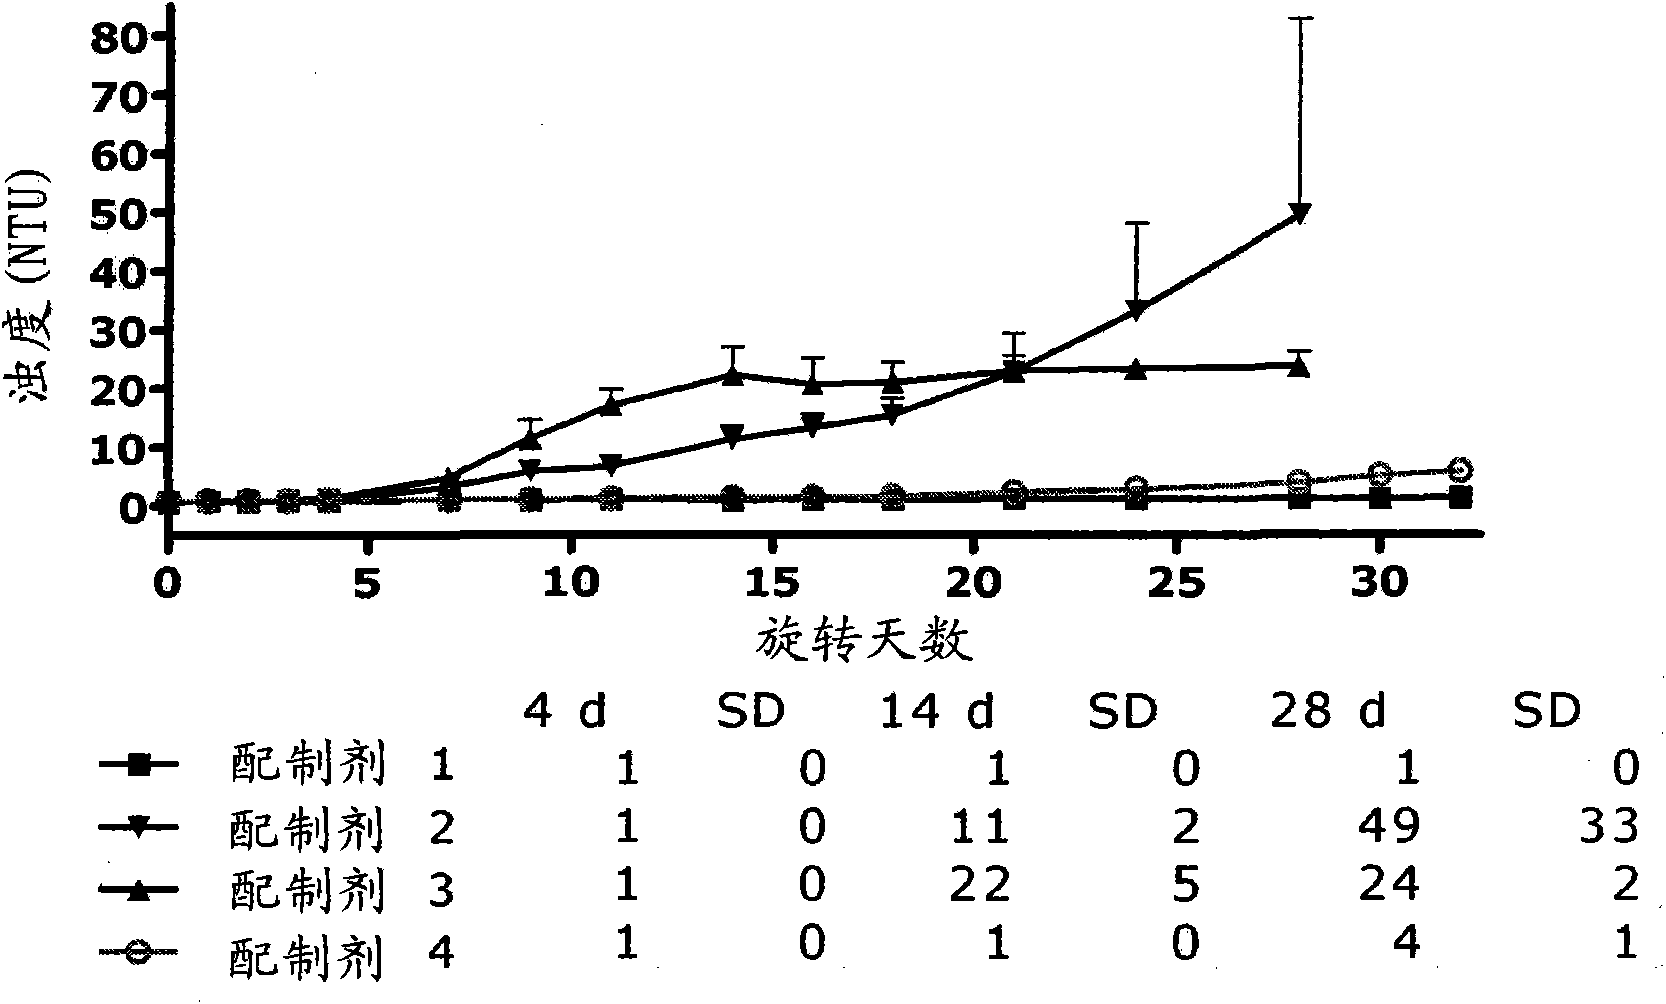 Pharmaceutical compositions comprising GLP-1 peptides or exendin-4 and a basal insulin peptide